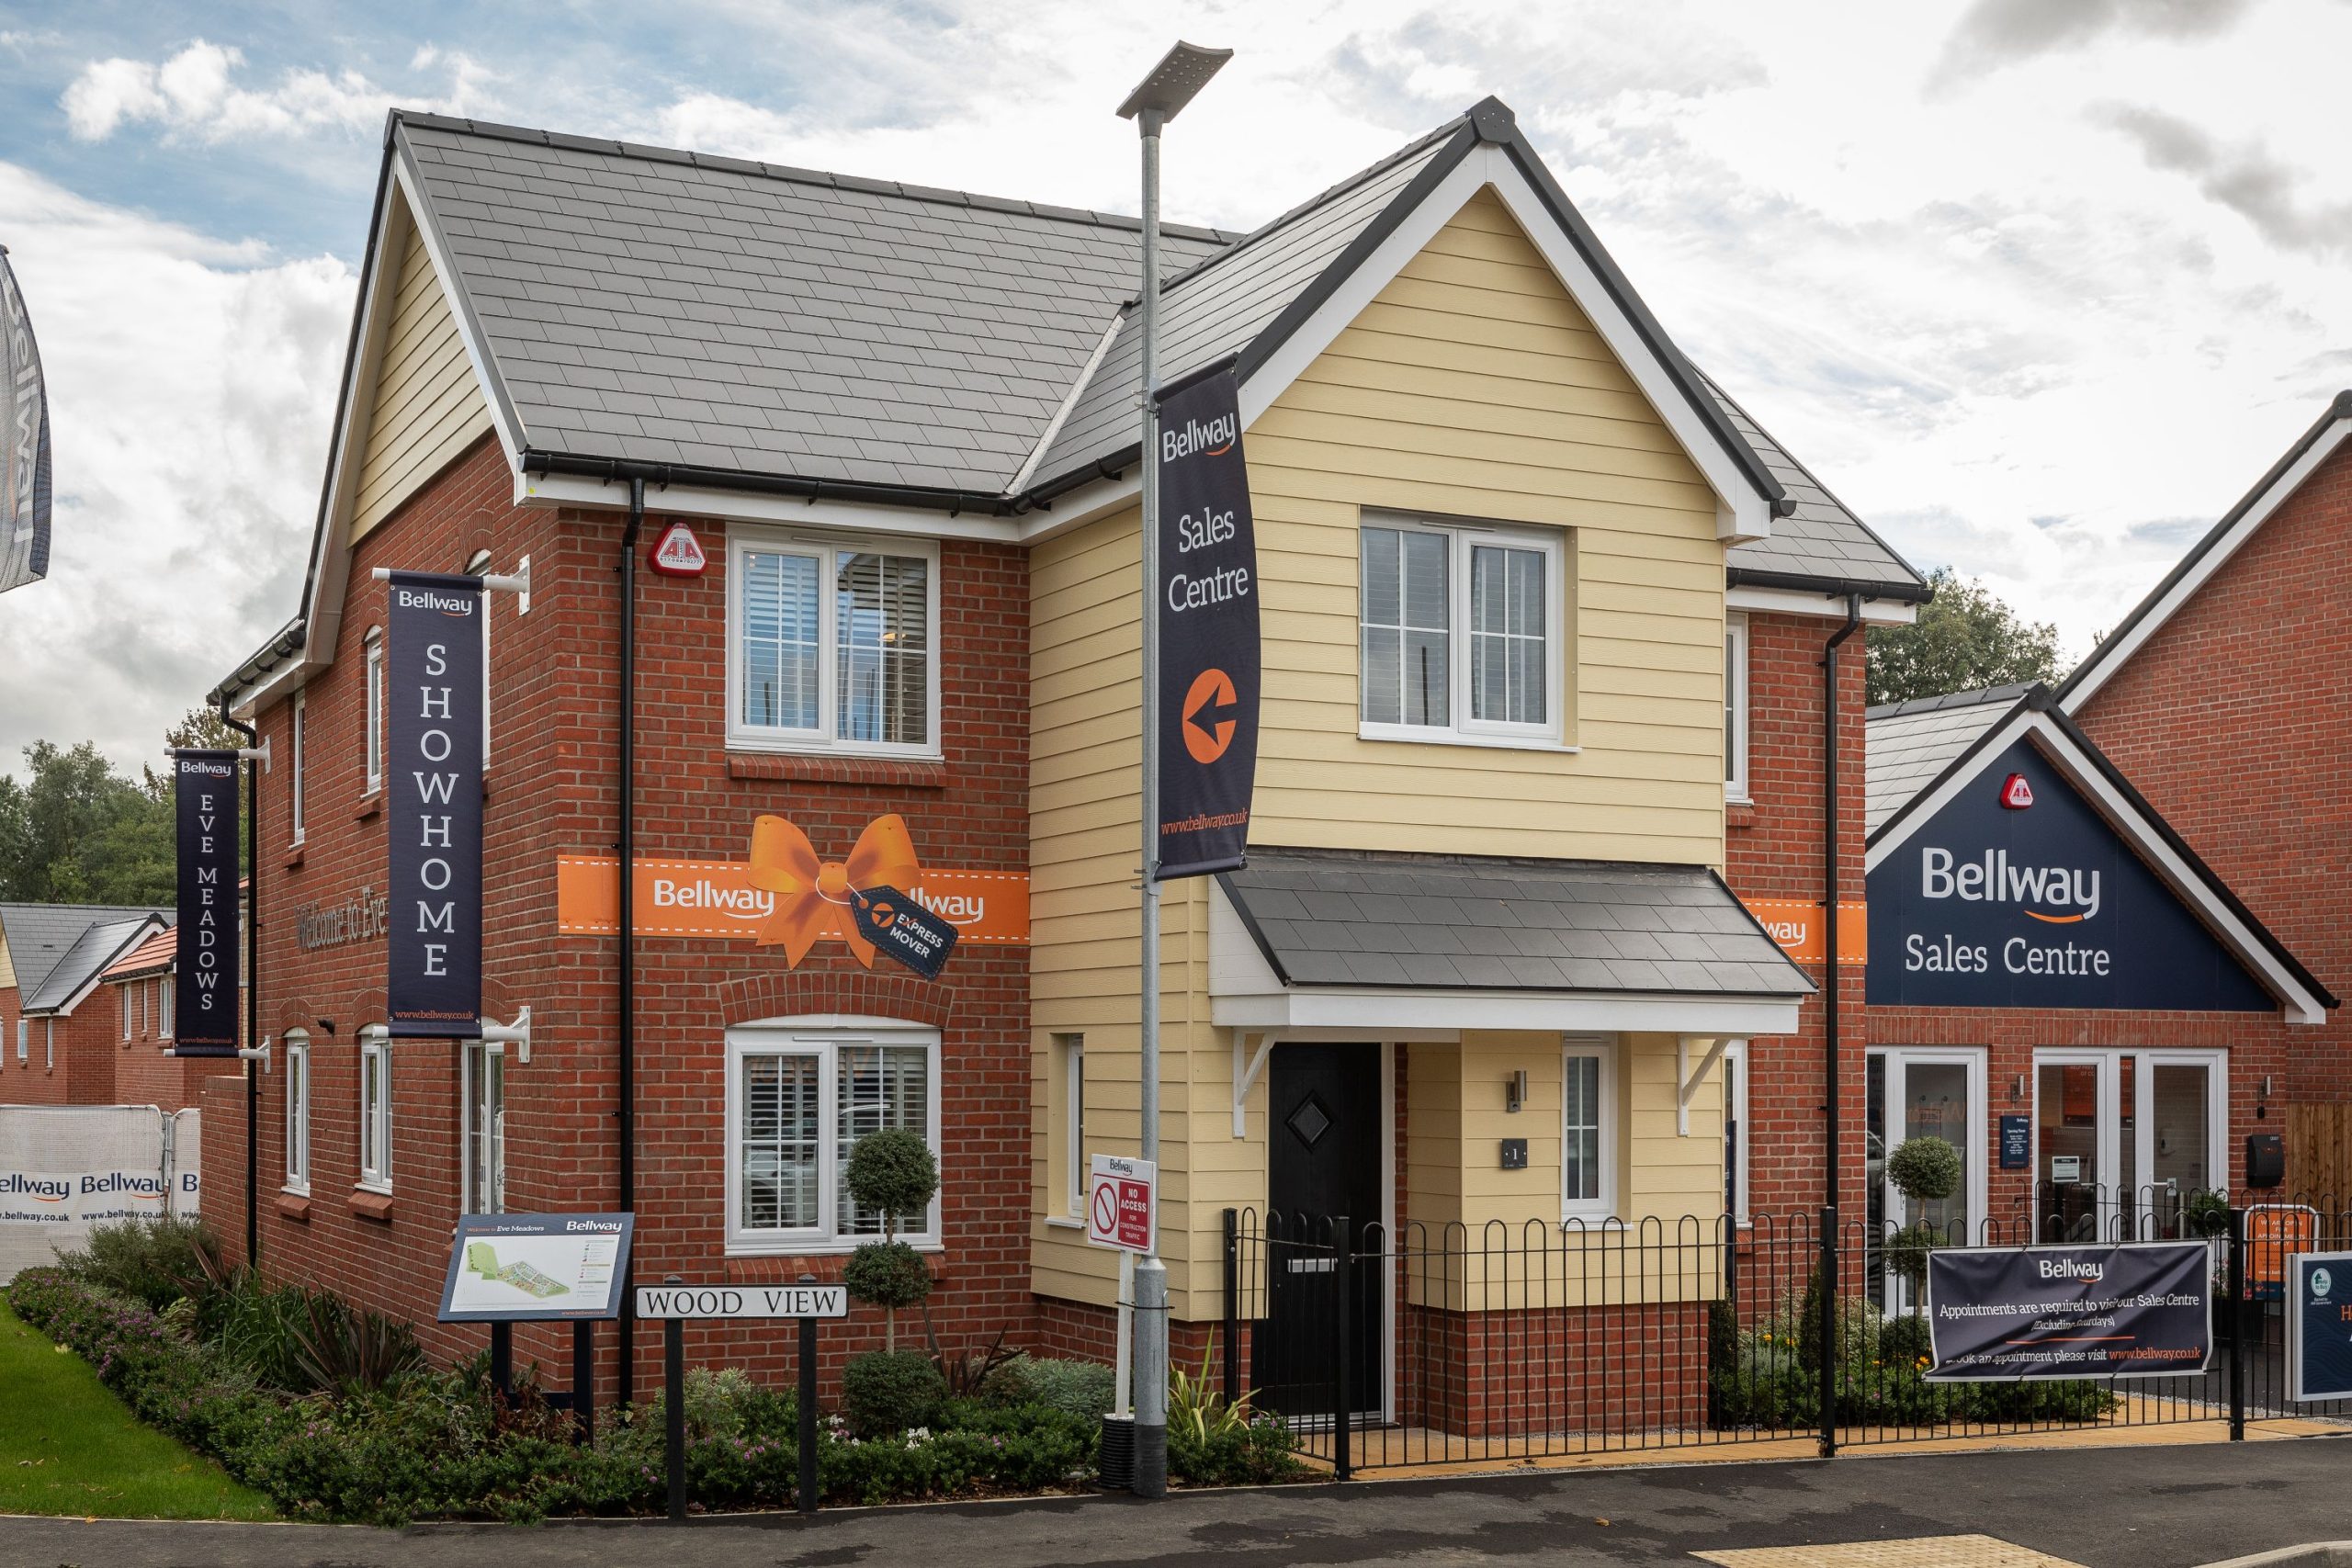 Surge in Demand for Homes at Haughley Development